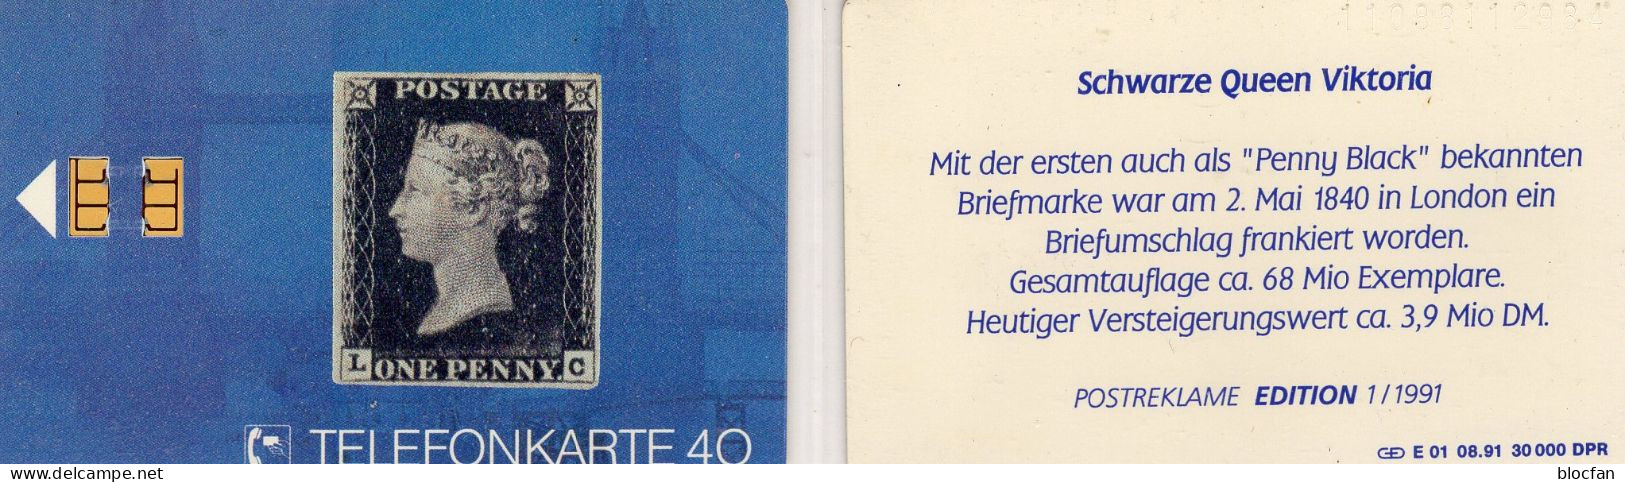 Penny Black 1840 TK E01/1991 30.000 Expl.** 25€ Edition 1 Schwarze Queen Victoria  TC History Stamp On Phonecard Germany - E-Reeksen : Uitgave - D. Postreclame